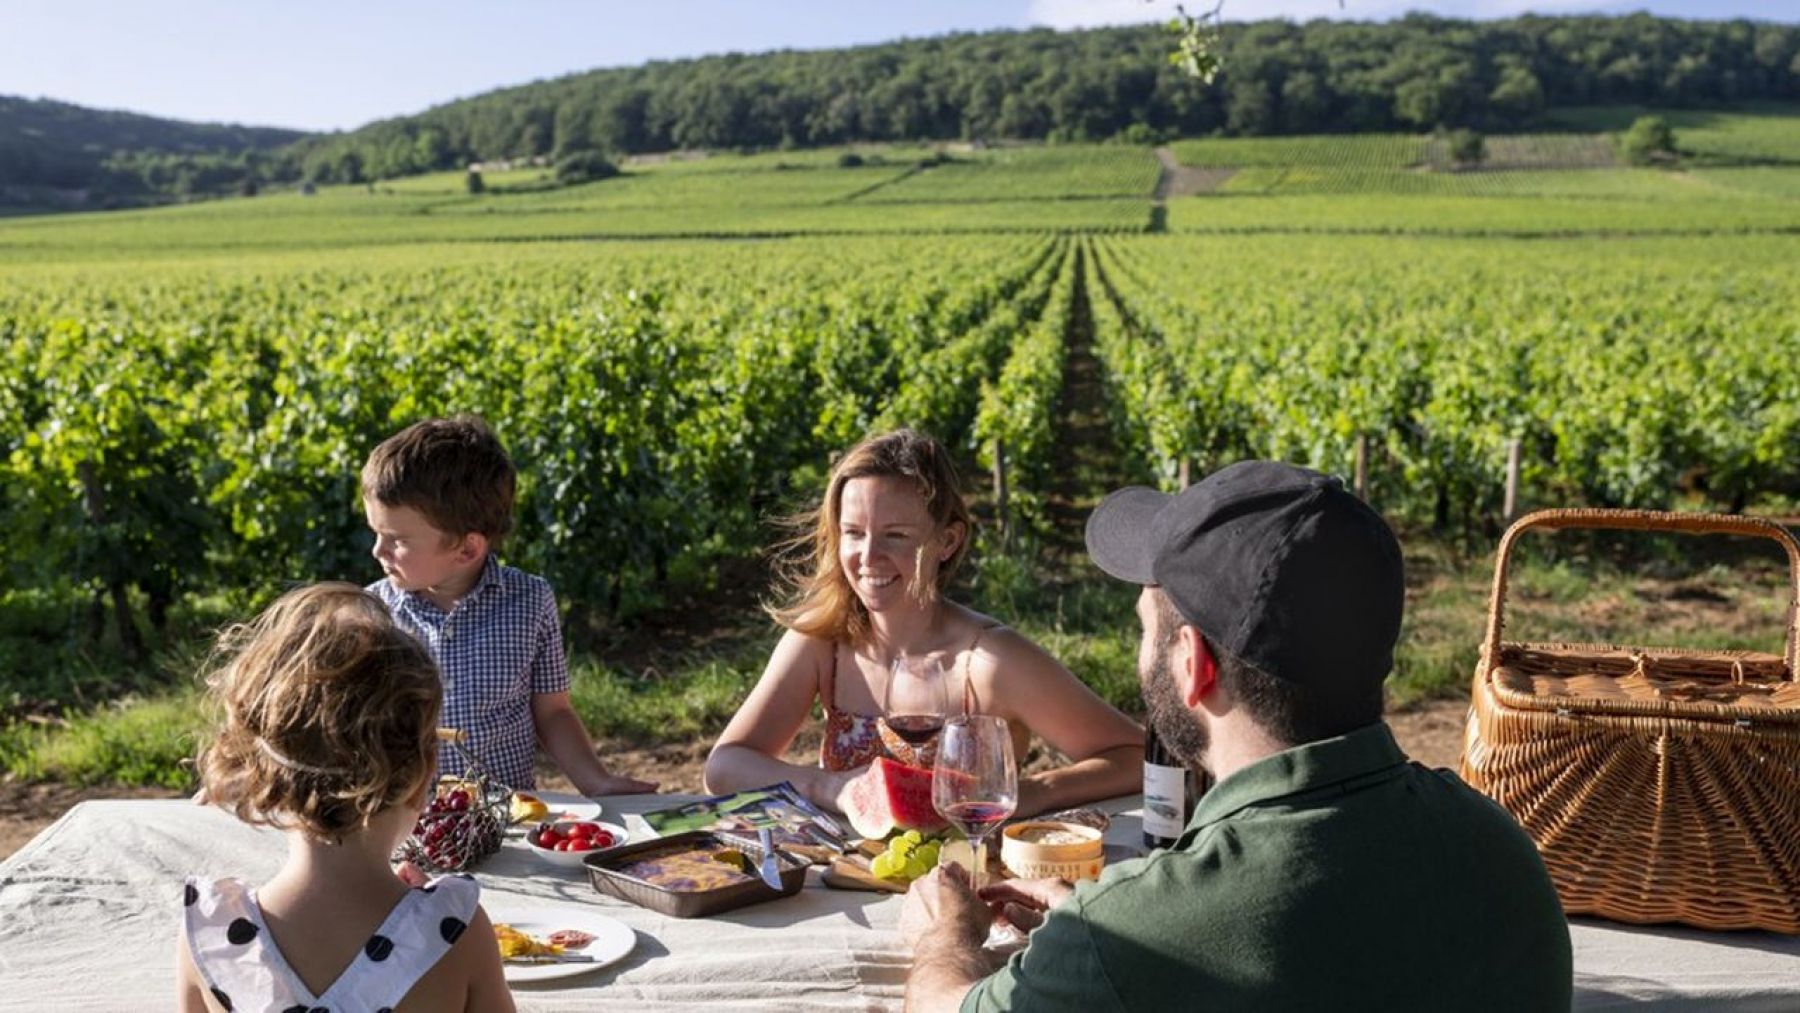 Where to picnic in Burgundy?